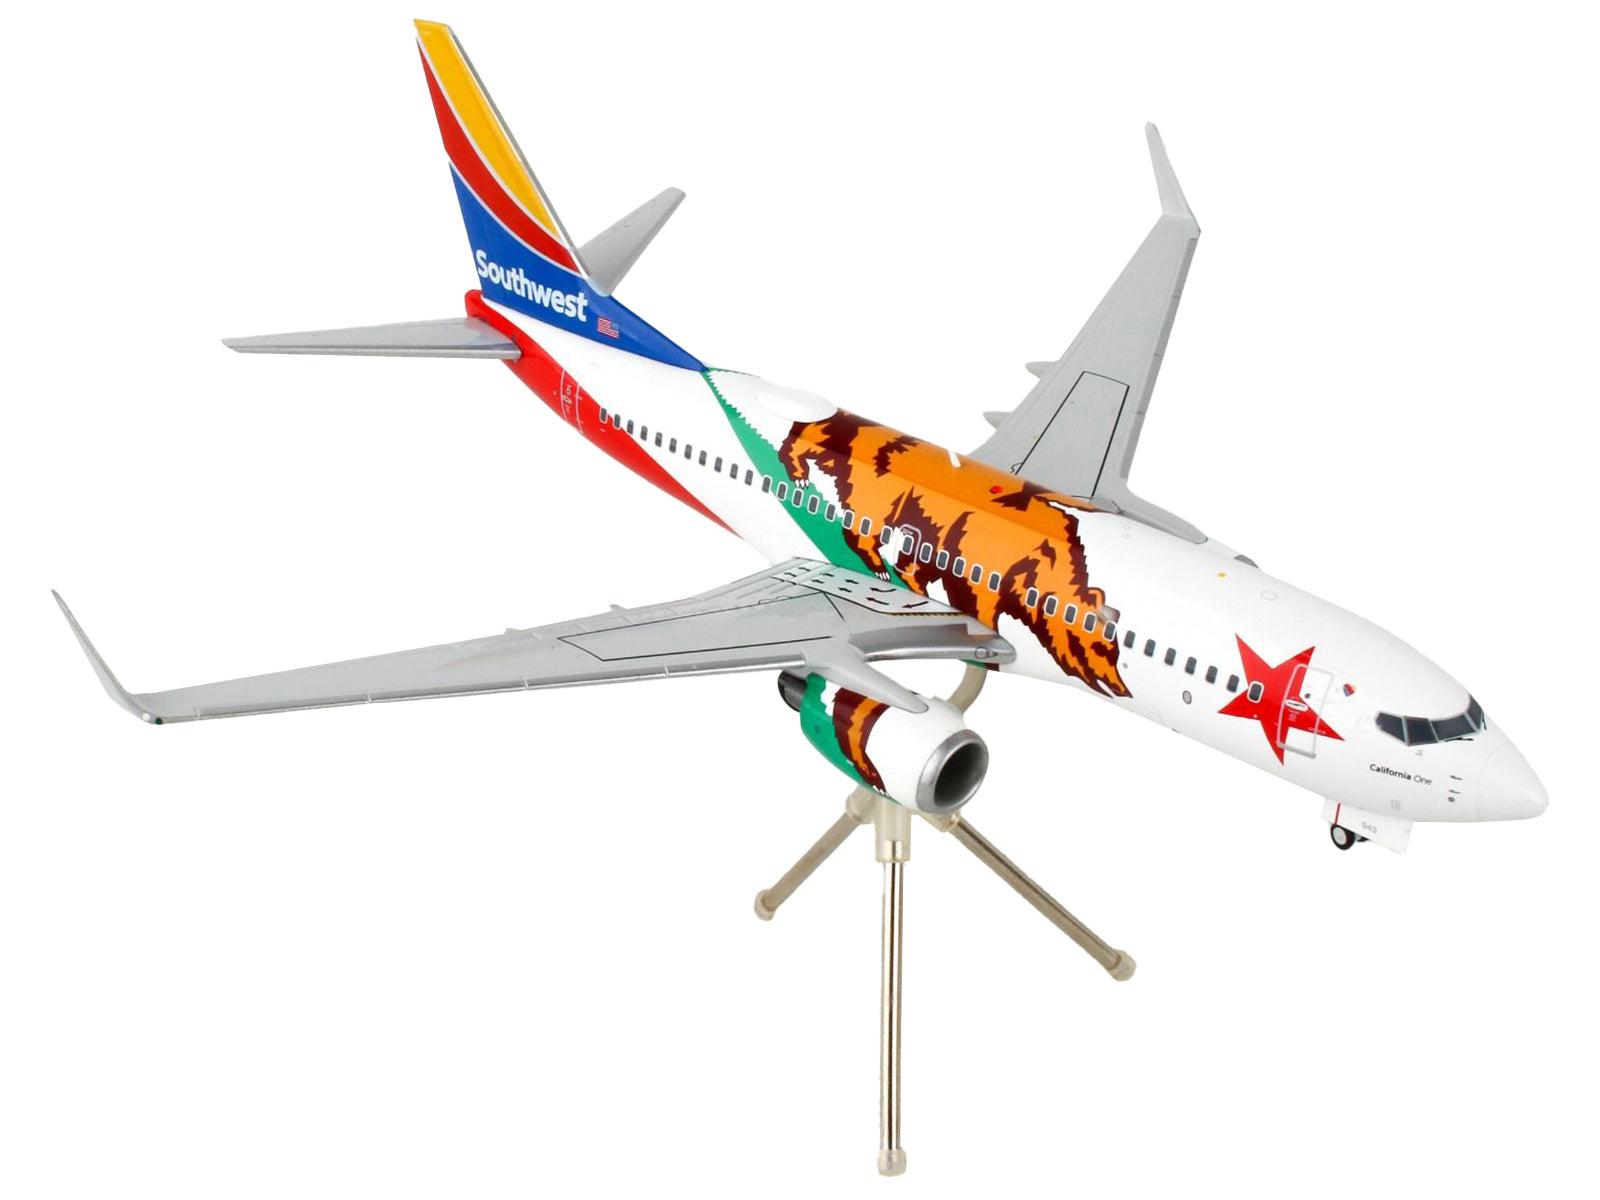 Boeing 737-700 Commercial Aircraft "Southwest Airlines - California One" California Flag Livery "Gemini 200" Series 1/200 Diecast Model Airplane by GeminiJets